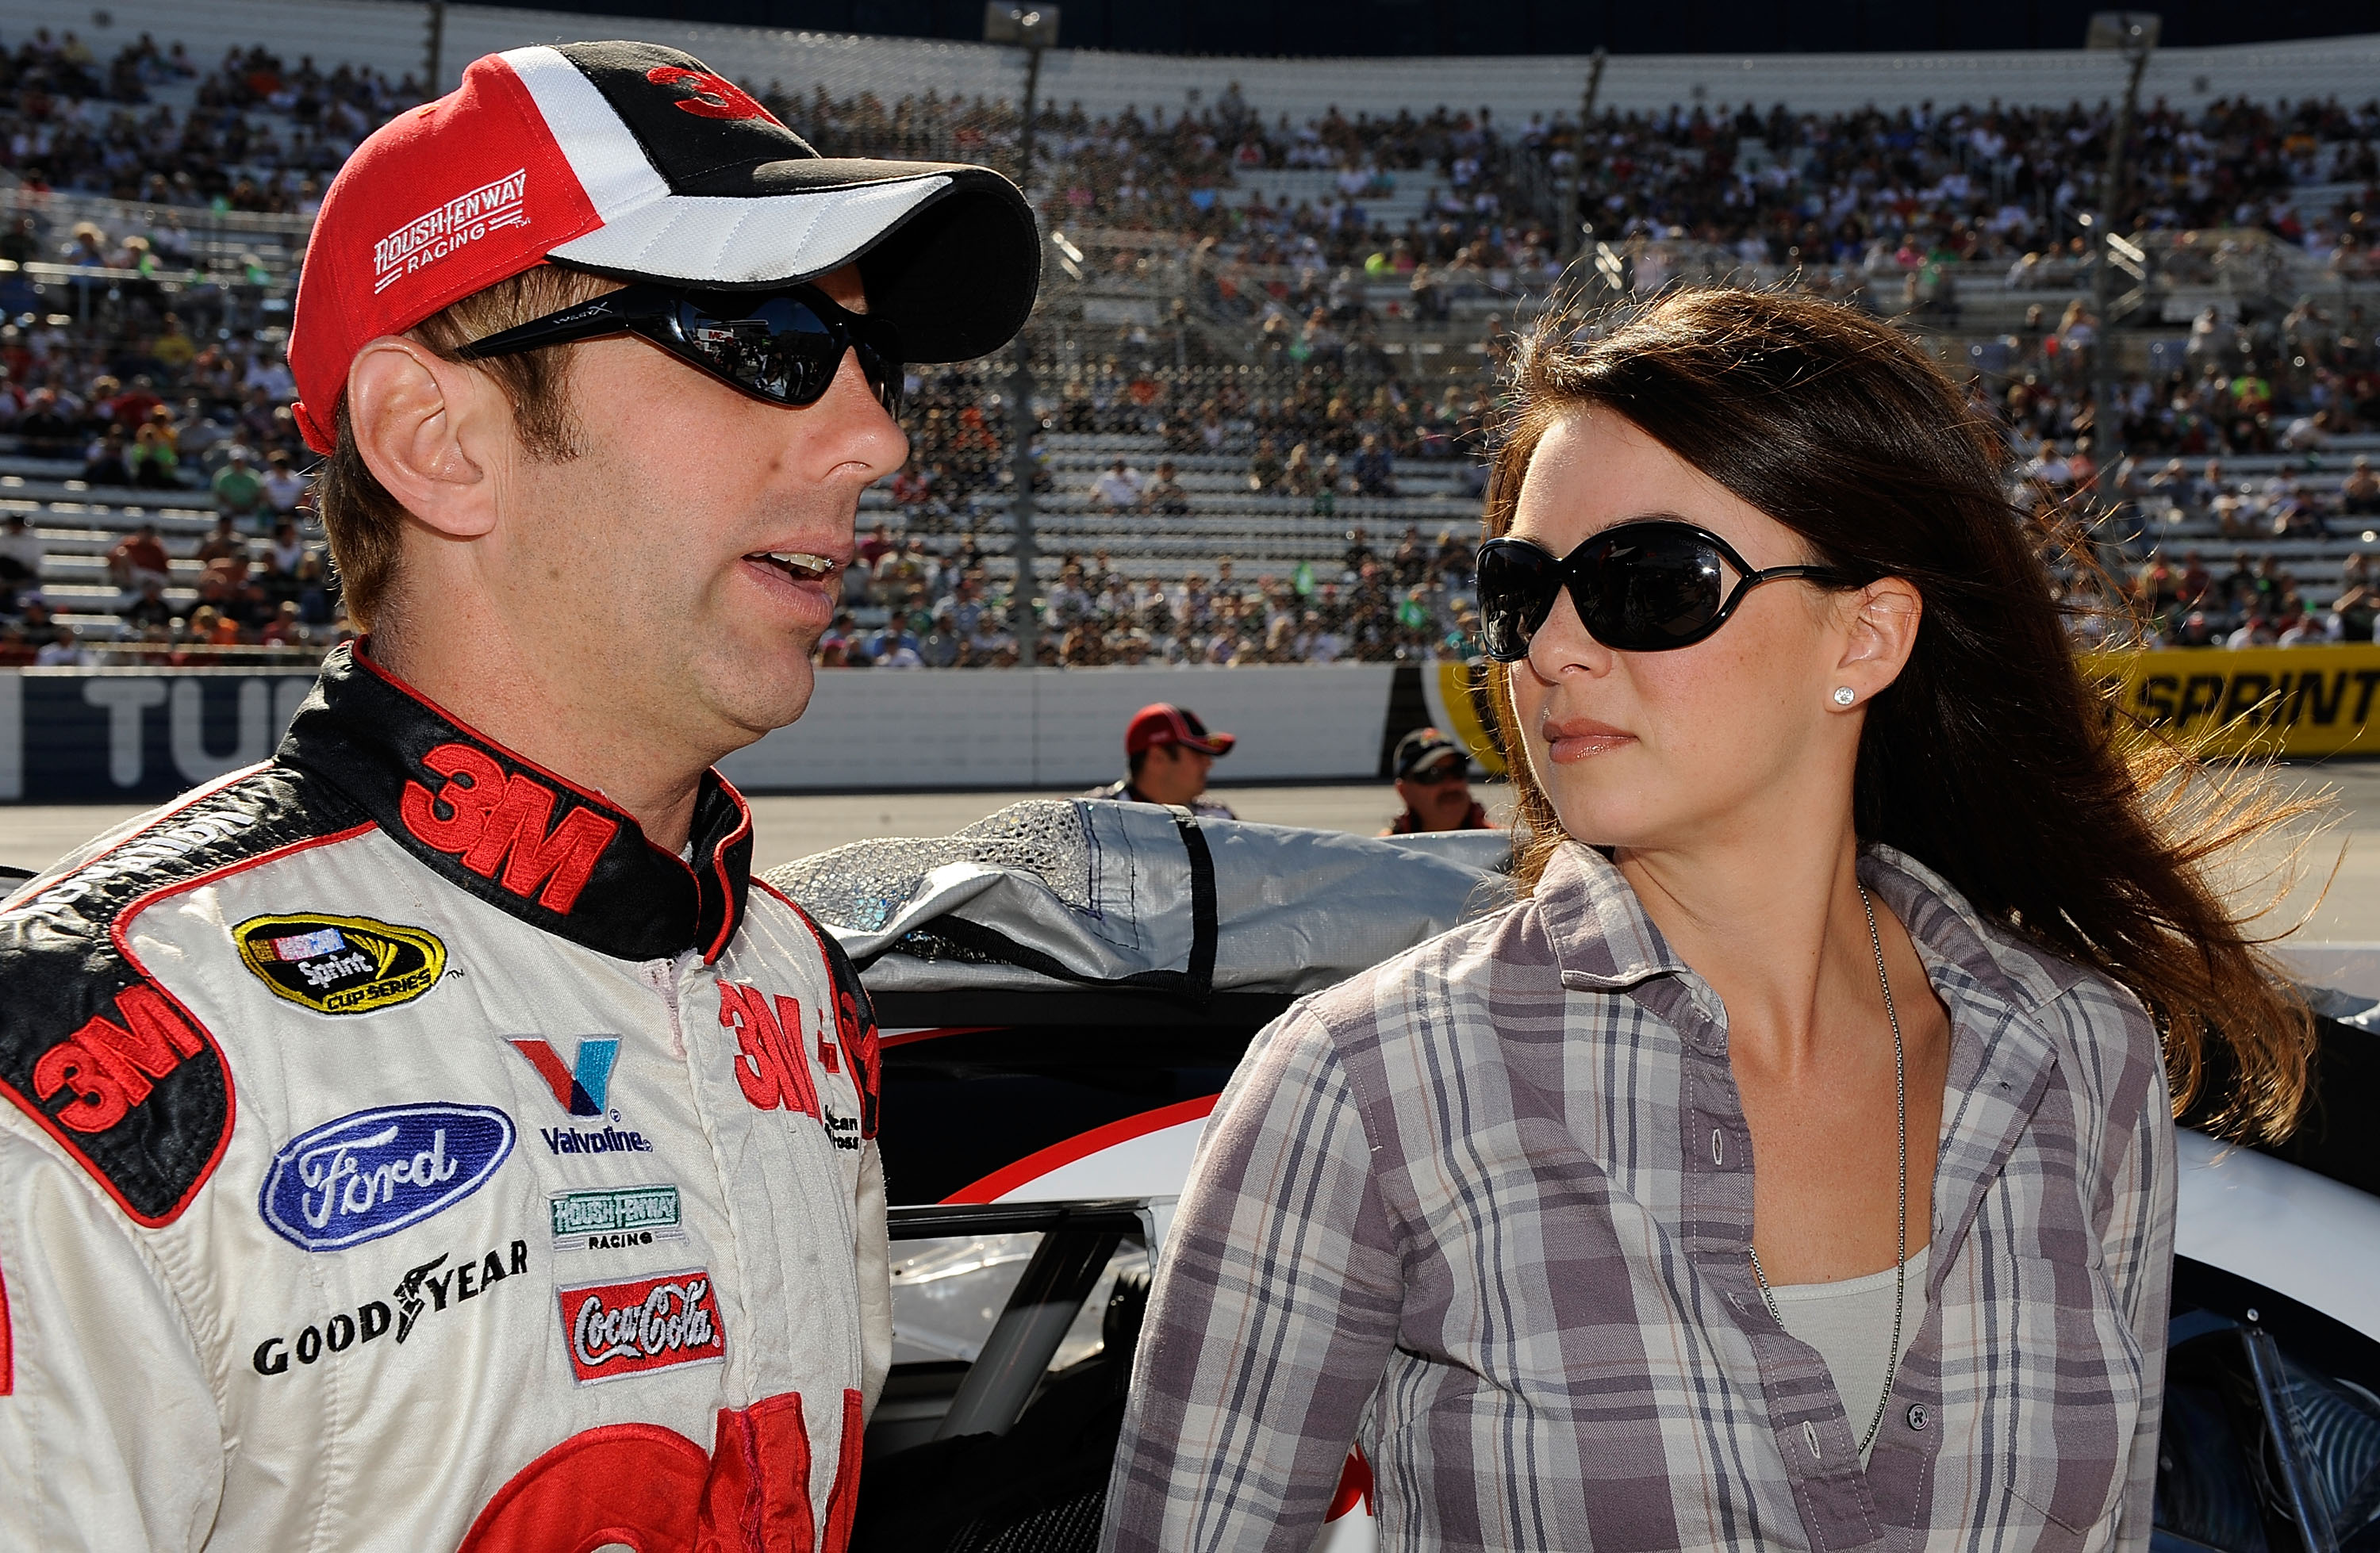 MARTINSVILLE, VA - OCTOBER 24:  Greg Biffle (L), driver of the #16 3M Ford, stands on the grid with his wife Nicole prior to the during the NASCAR Sprint Cup Series TUMS Fast Relief 500 at Martinsville Speedway on October 24, 2010 in Martinsville, Virgini